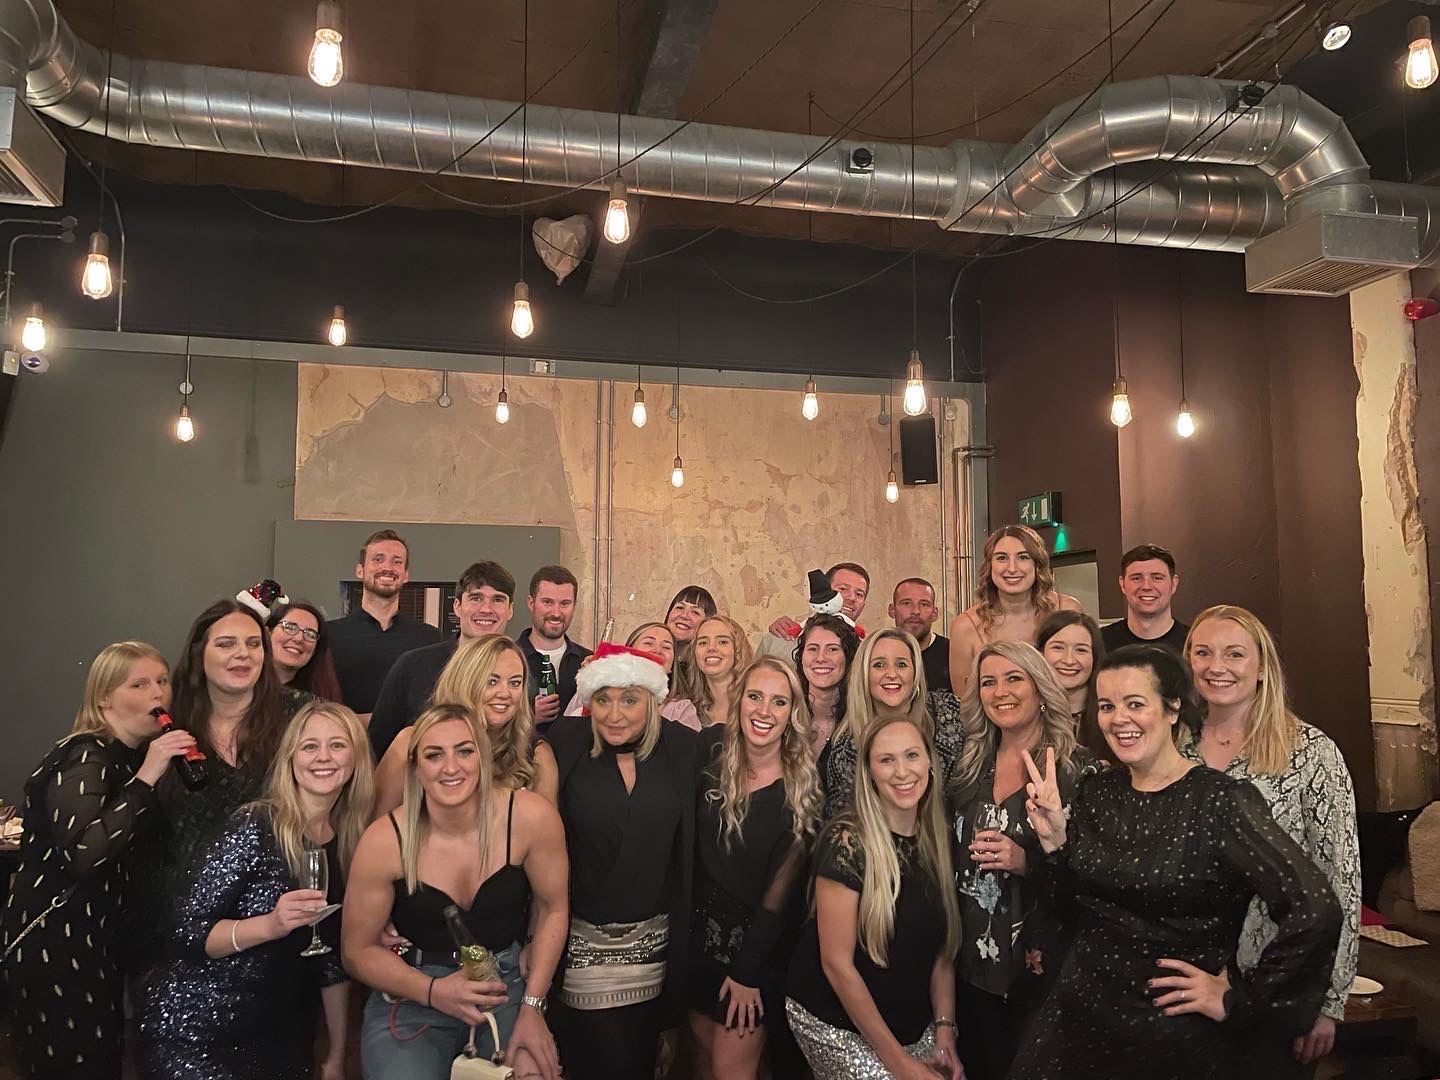 Jemma and her clients enjoying a Christmas party together